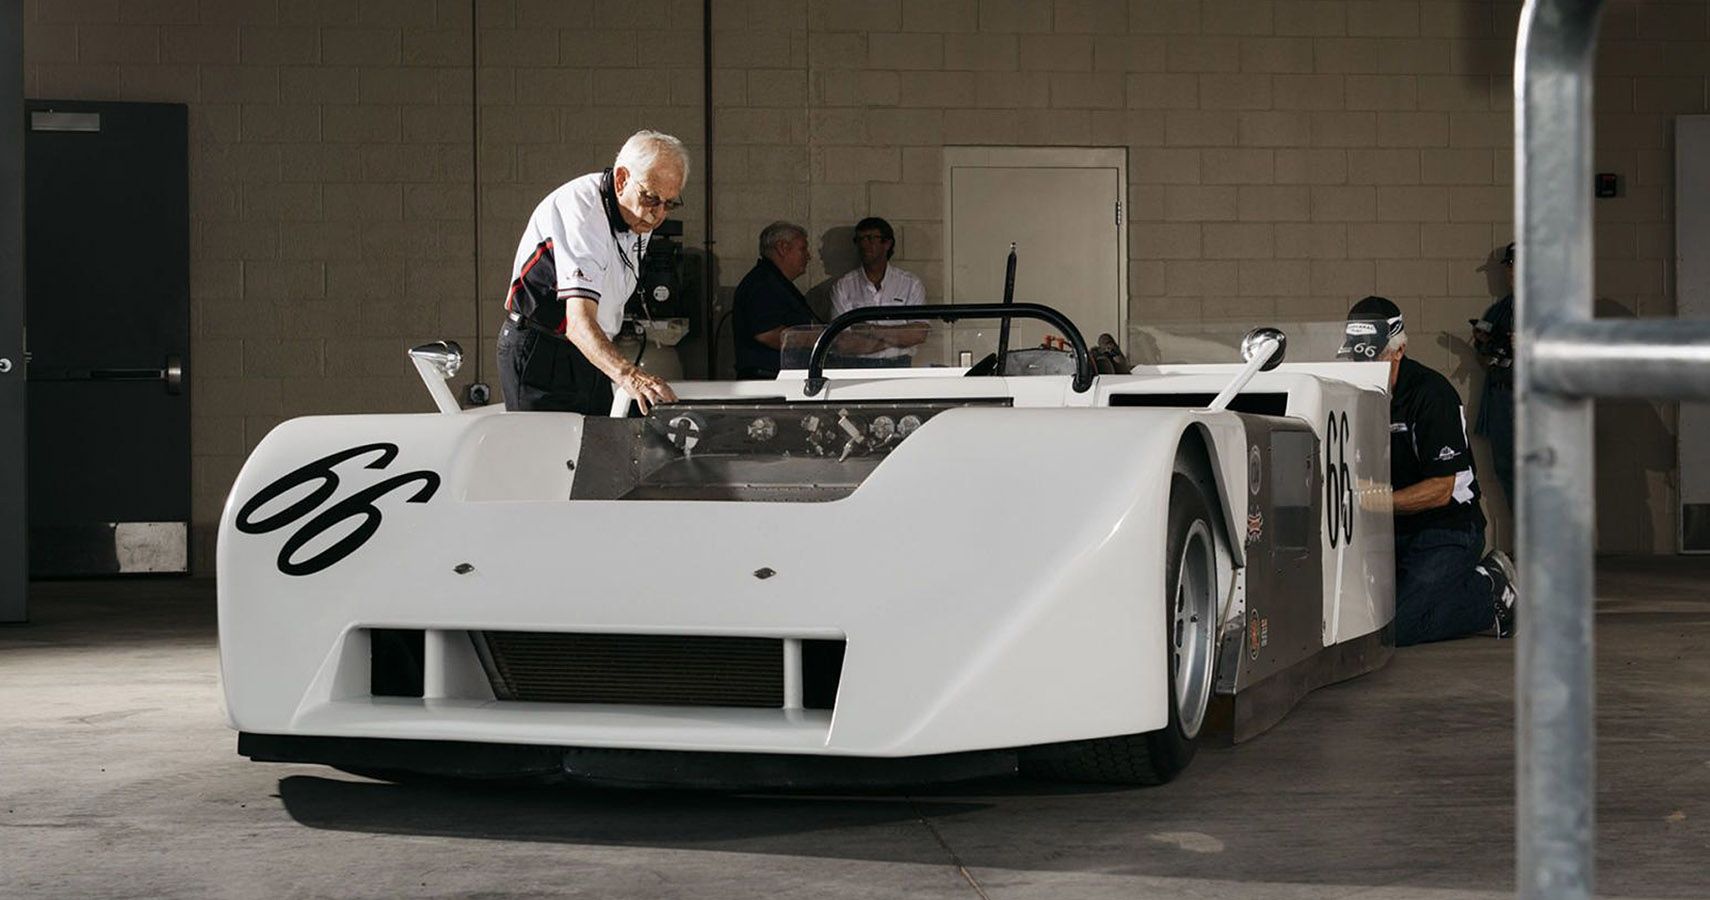 1970 Chaparral 2J Chevrolet - Images, Specifications and Information